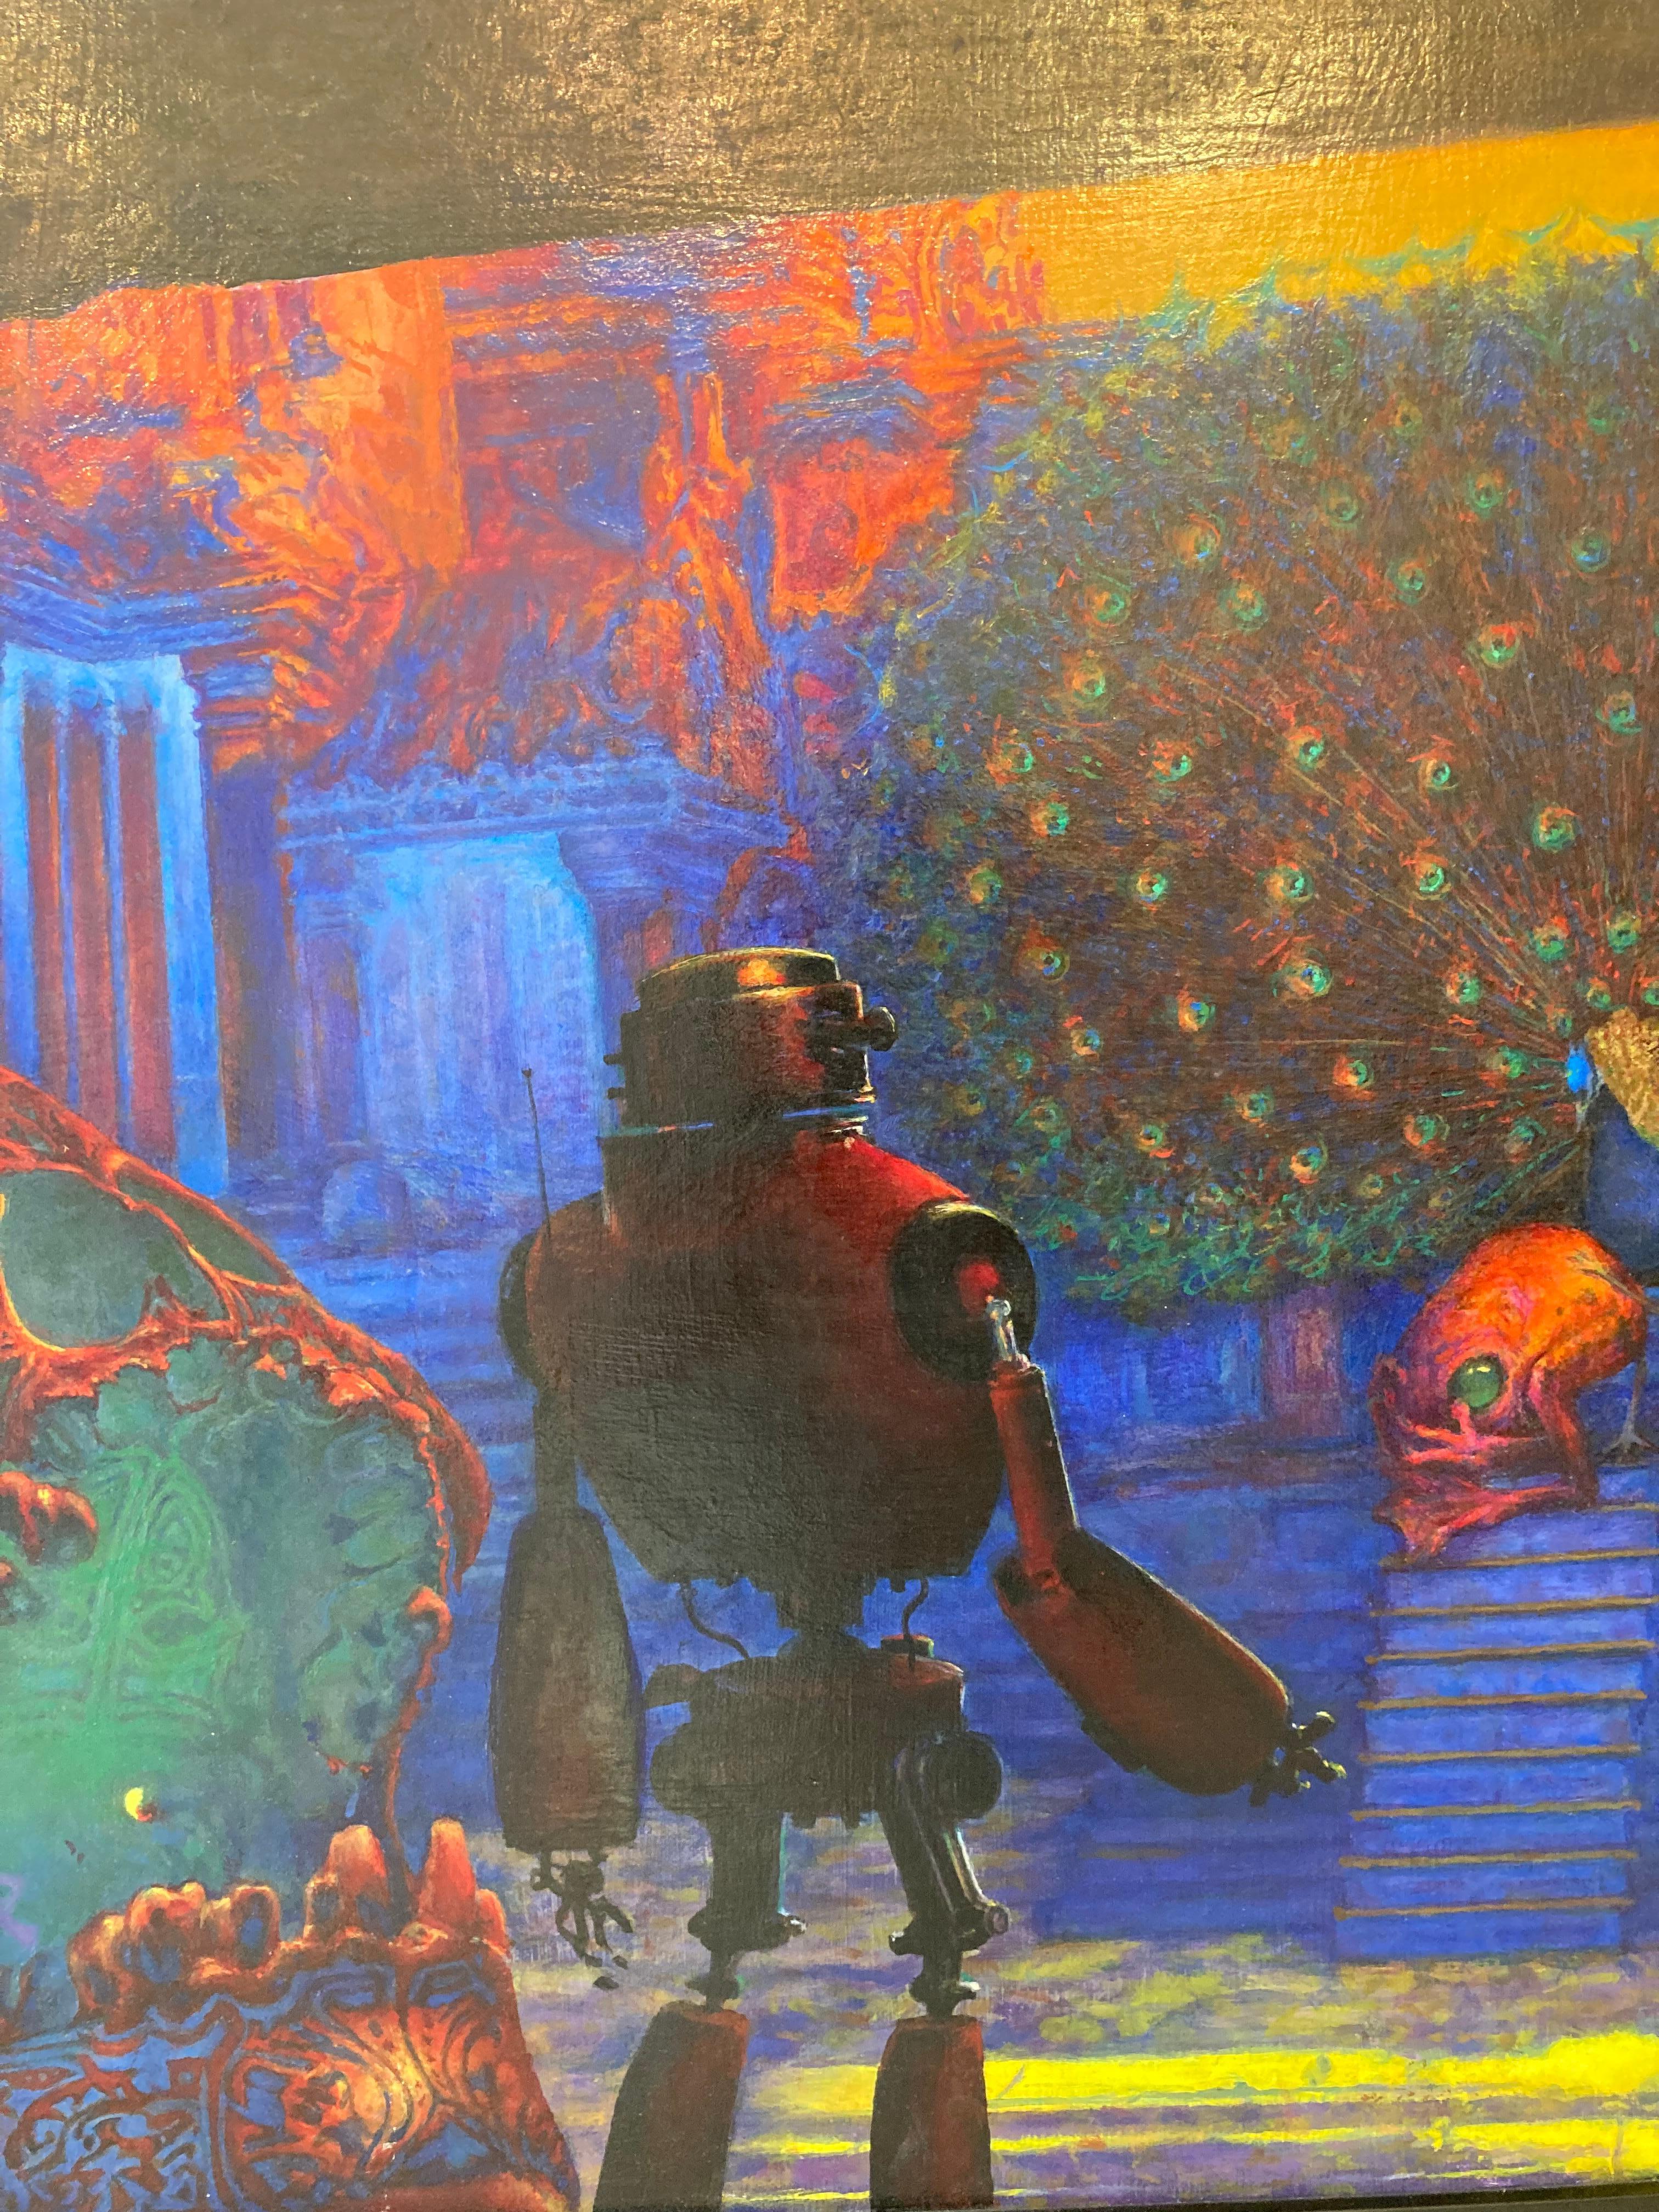 This oil on canvas by Mark Gilmore depicts the fantastical meeting between the robot Ulysses as he witnesses the subjugation of a subject by the peacock king. Ulysses is flanked between two large skulls that are cast shadows of red and green. In the